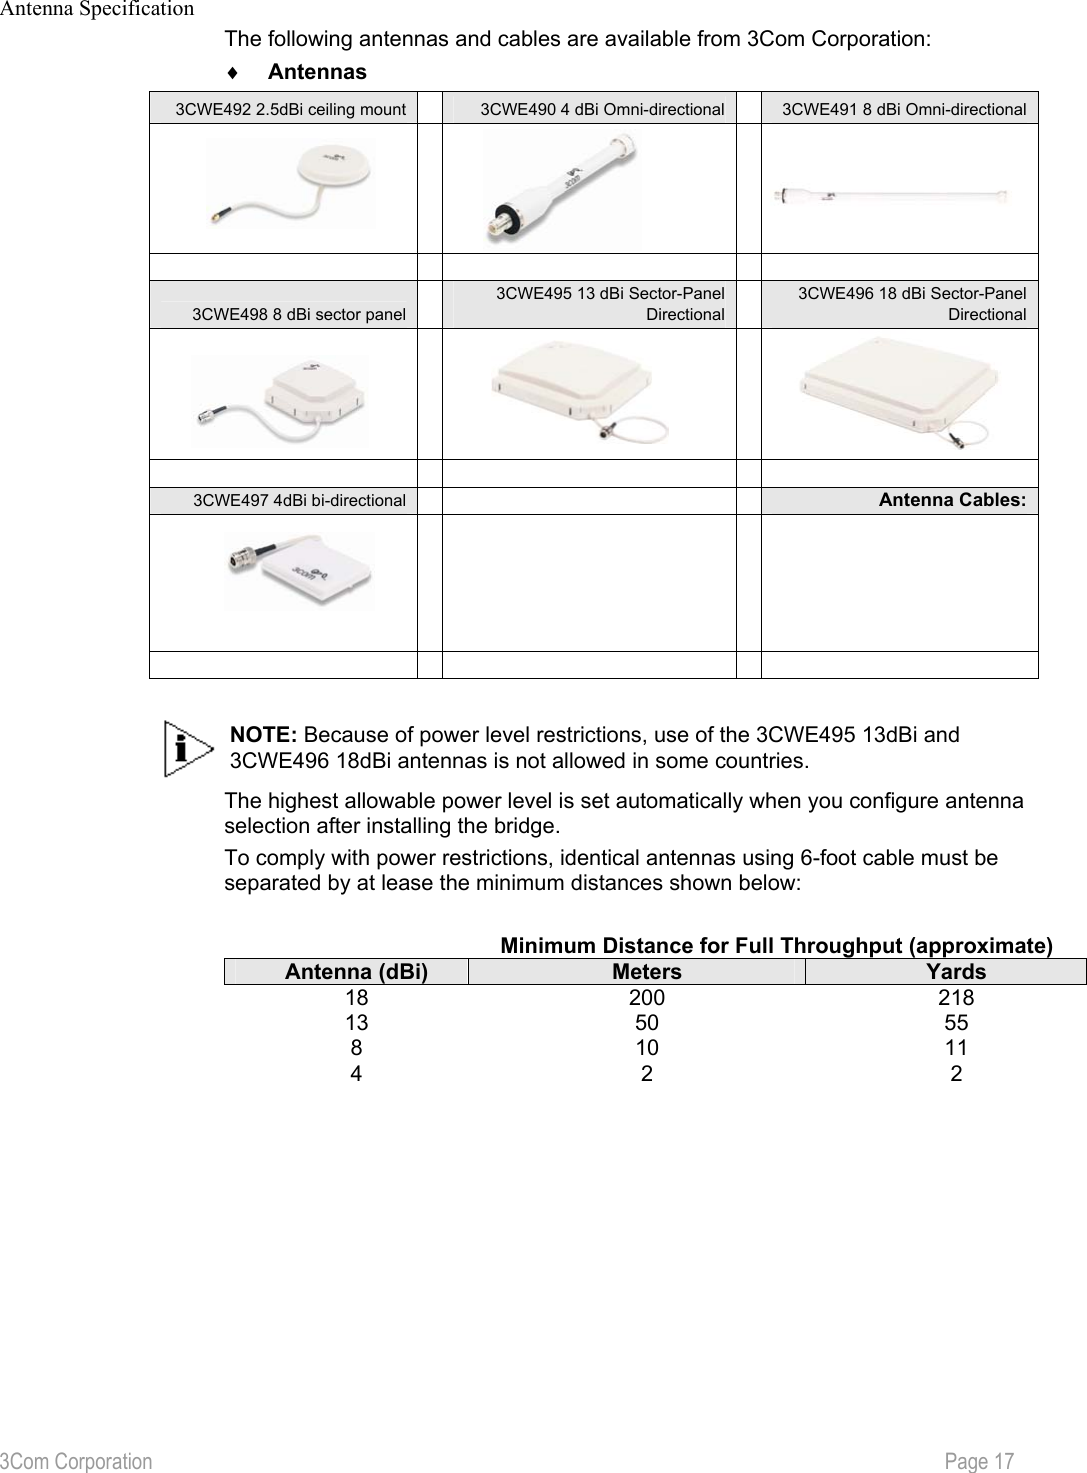 3Com Corporation           Page 17  Antenna Specification The following antennas and cables are available from 3Com Corporation: ♦  Antennas 3CWE492 2.5dBi ceiling mount 3CWE490 4 dBi Omni-directional 3CWE491 8 dBi Omni-directional  3CWE498 8 dBi sector panel 3CWE495 13 dBi Sector-Panel Directional3CWE496 18 dBi Sector-Panel Directional  3CWE497 4dBi bi-directional Antenna Cables:   NOTE: Because of power level restrictions, use of the 3CWE495 13dBi and 3CWE496 18dBi antennas is not allowed in some countries. The highest allowable power level is set automatically when you configure antenna selection after installing the bridge. To comply with power restrictions, identical antennas using 6-foot cable must be separated by at lease the minimum distances shown below:    Minimum Distance for Full Throughput (approximate) Antenna (dBi)  Meters  Yards 18 200  218 13 50  55 8 10  11 4 2  2           